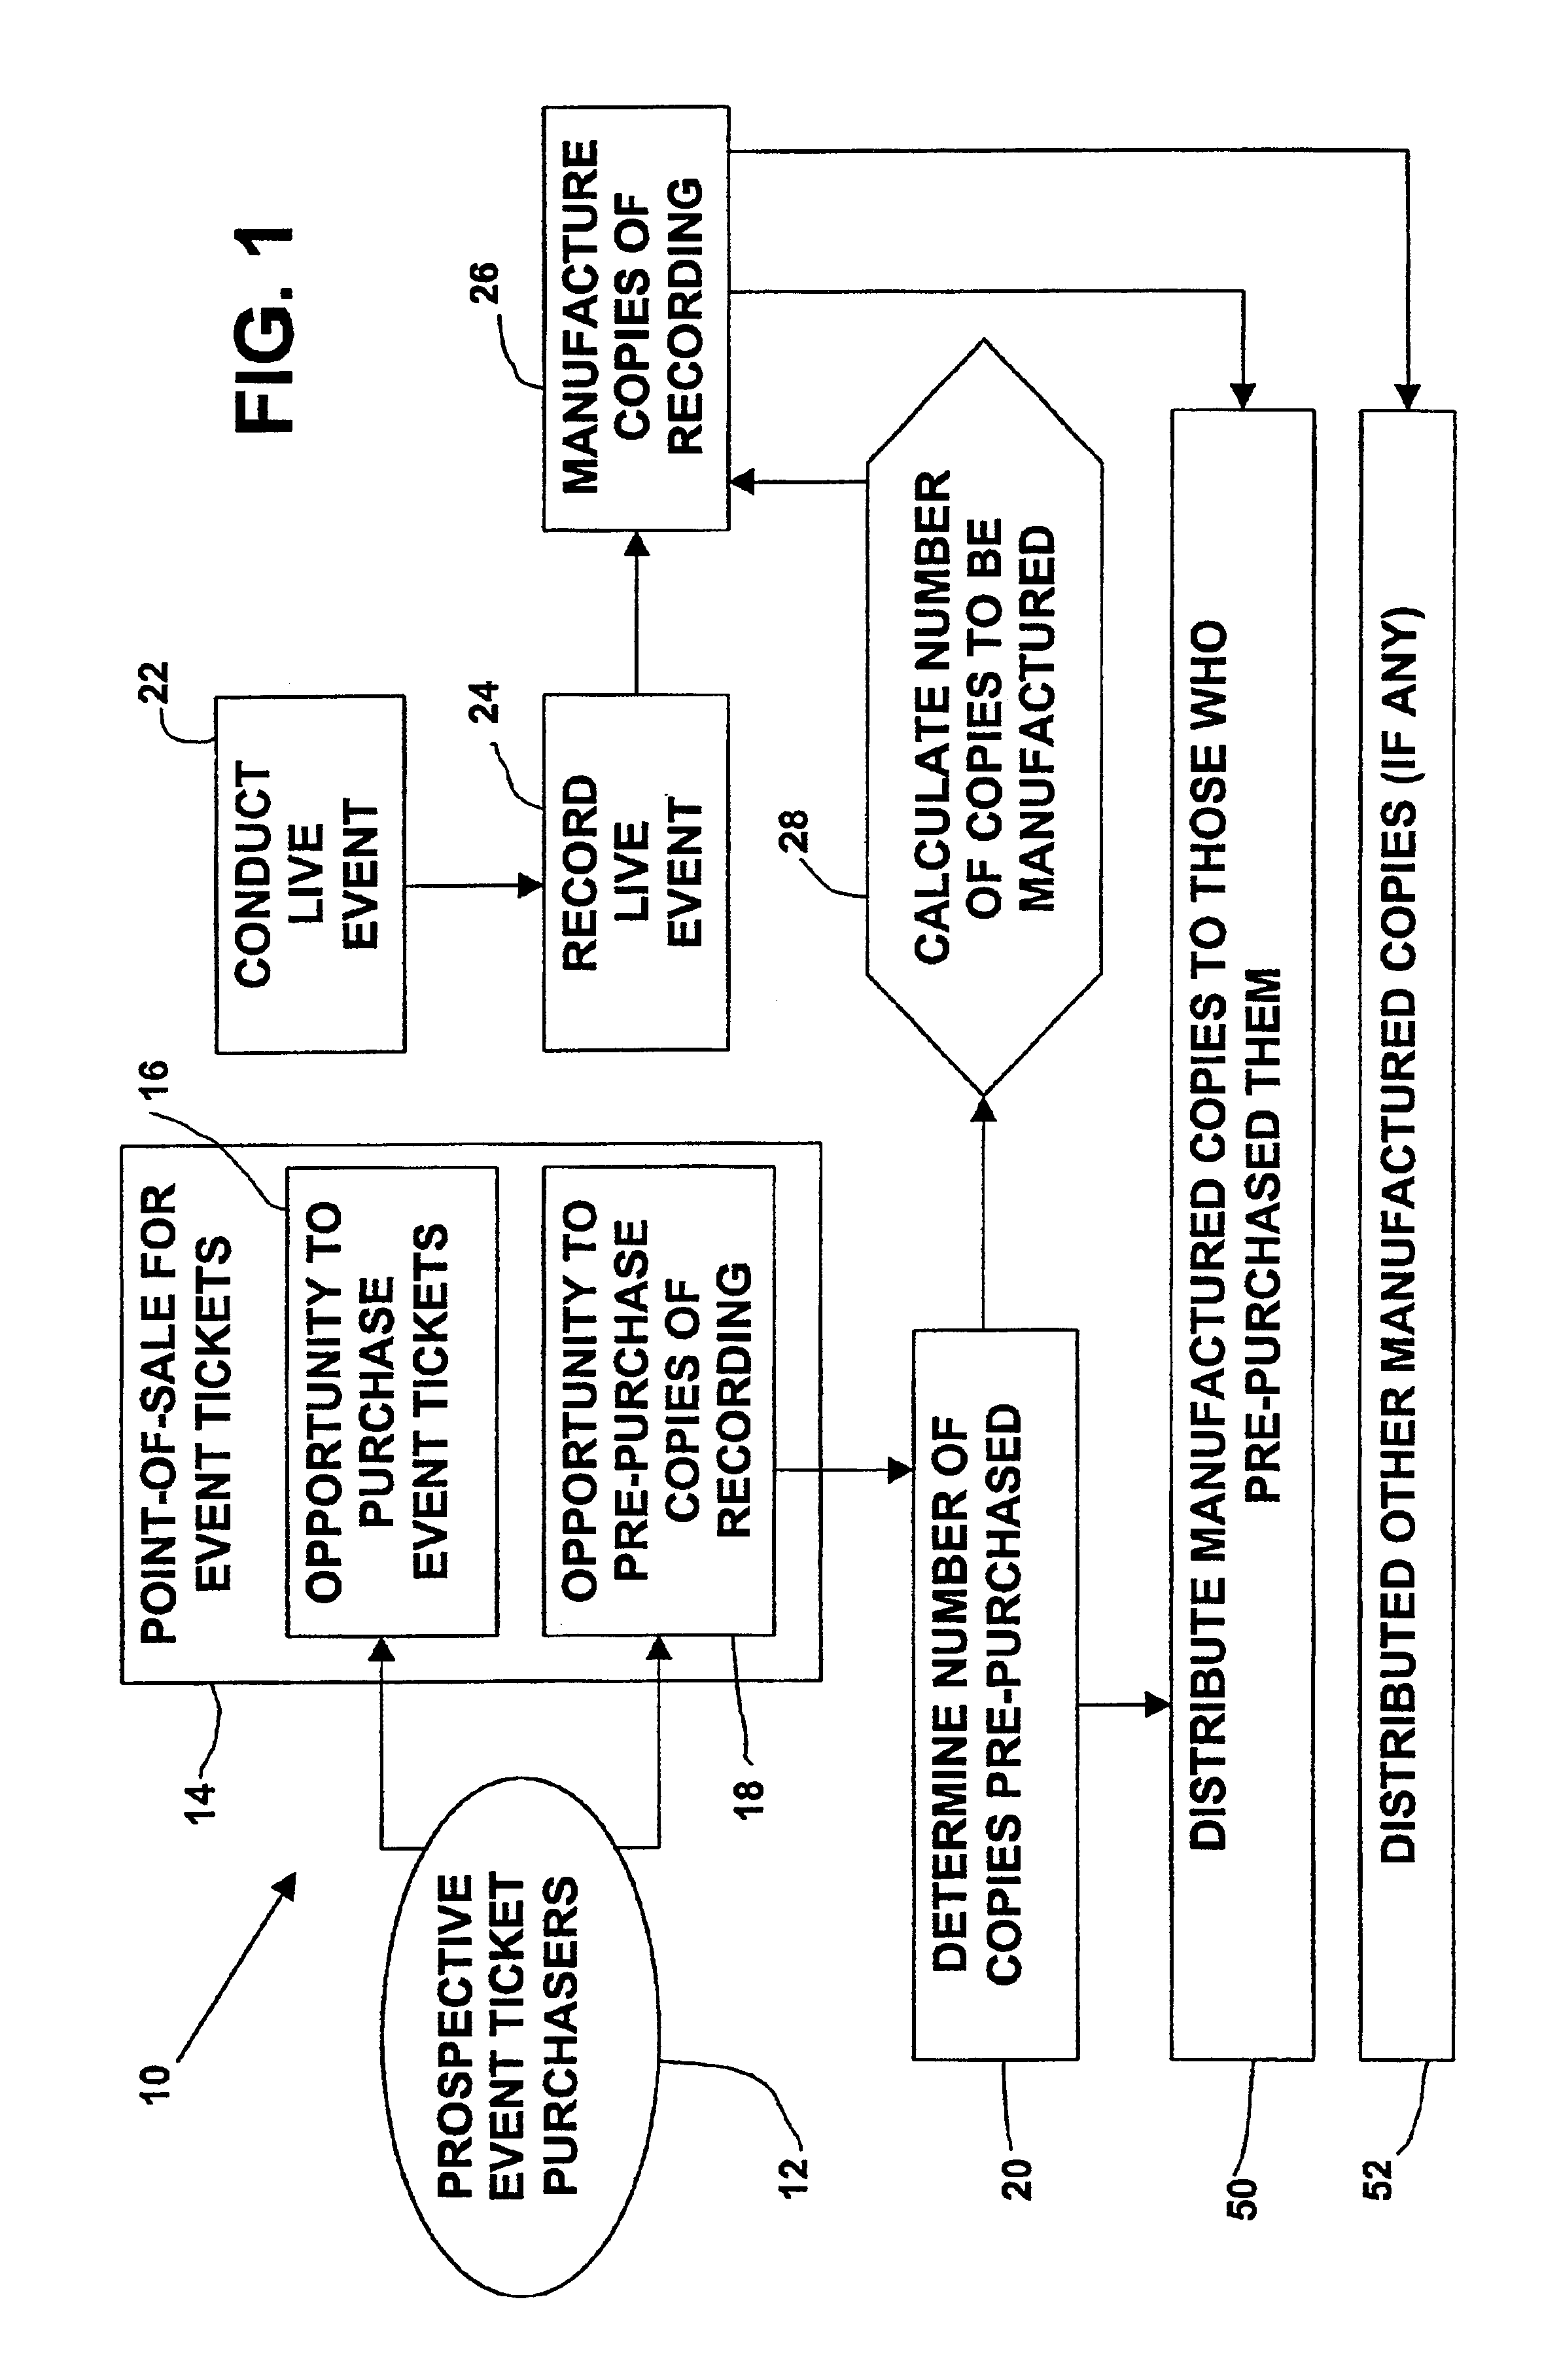 Method of selling and distributing articles associated with live events